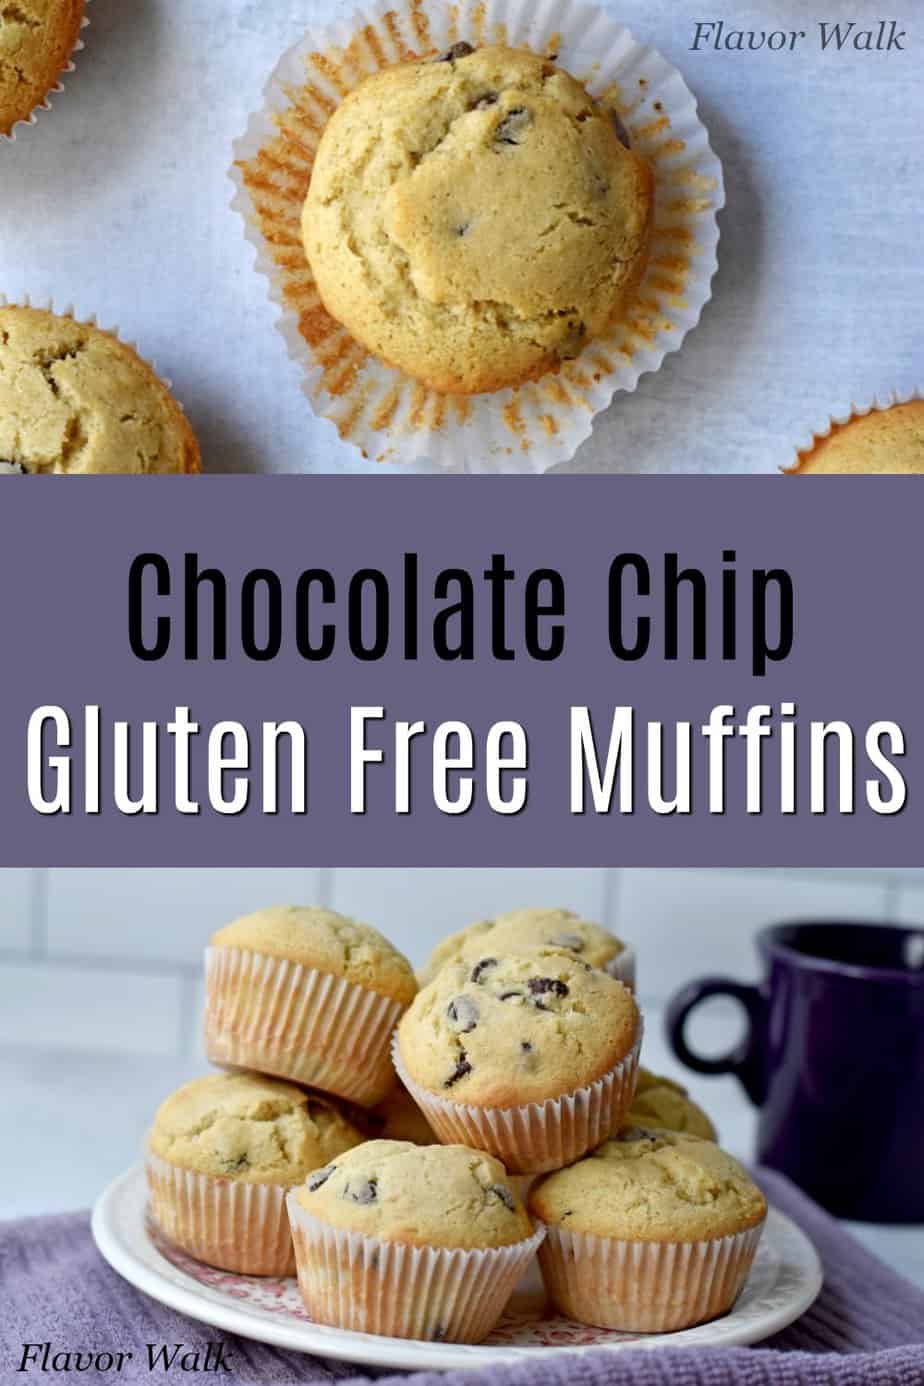 Top image overhead view of one gluten free chocolate chip muffins, middle image purple text box with black and white text, bottom image stack of muffins on round plate with coffee cup in the background.